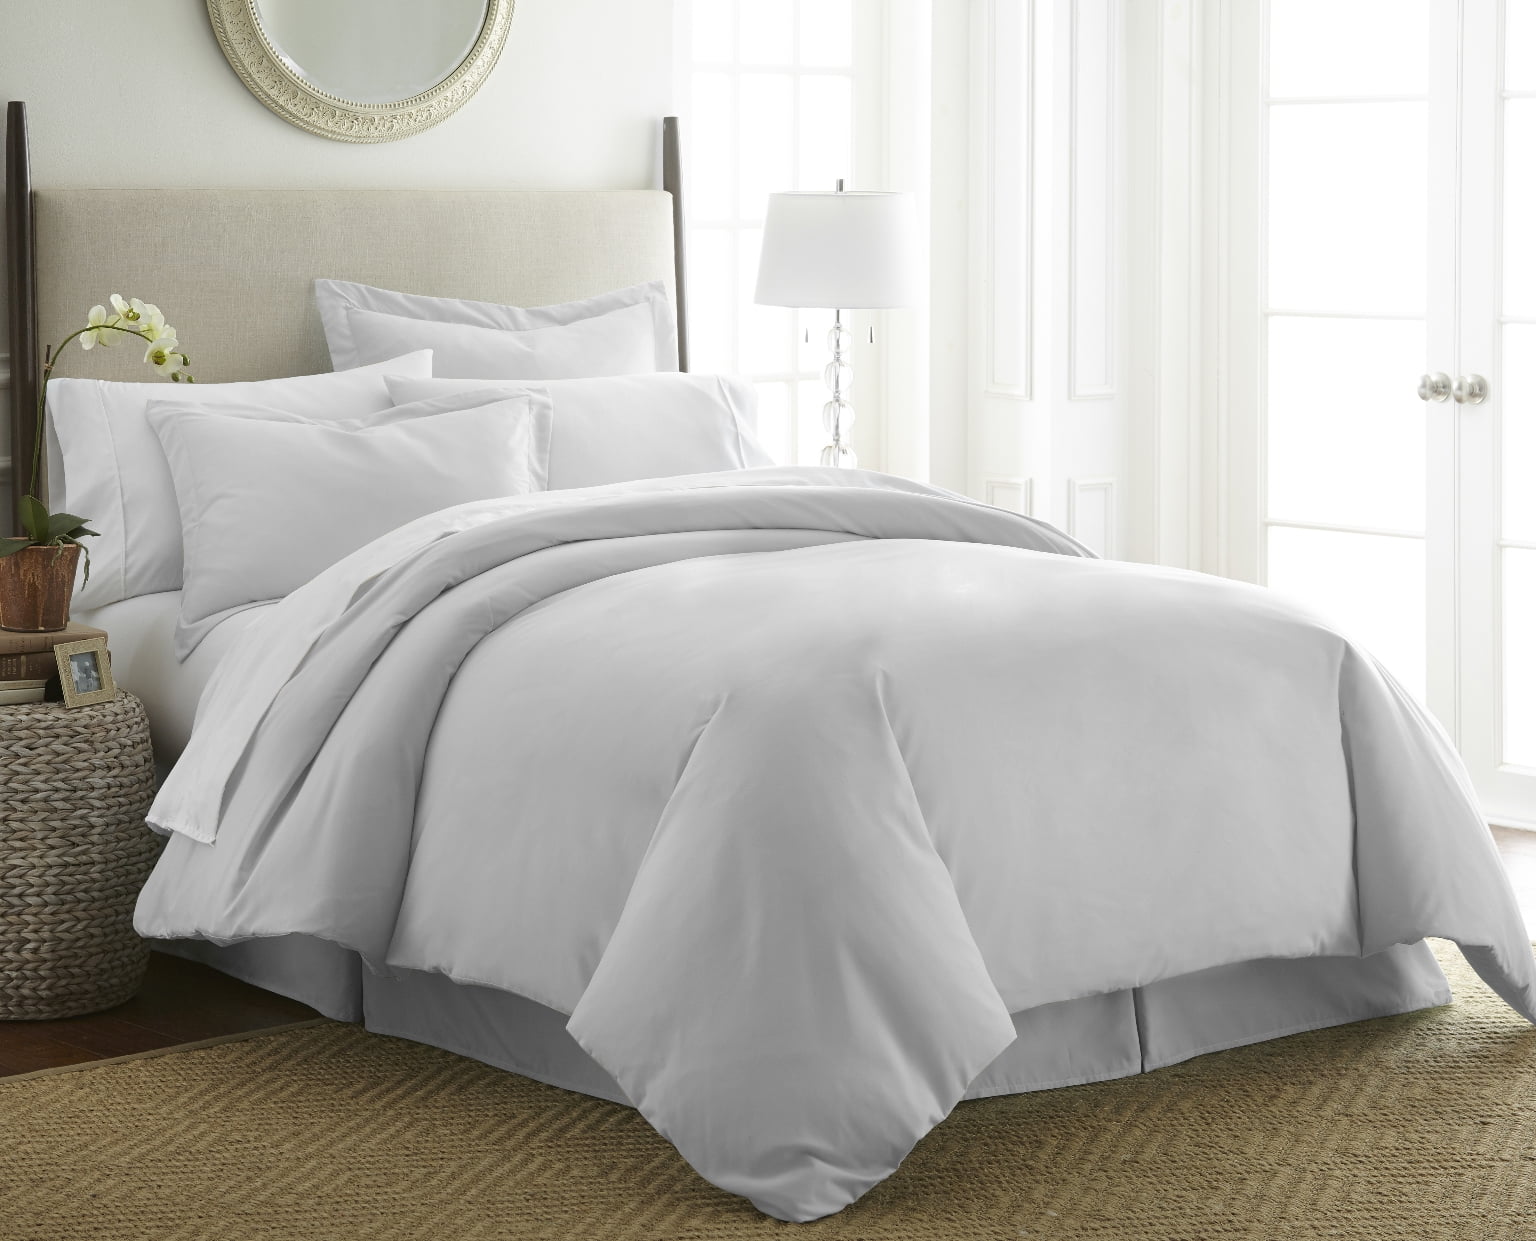 Light Gray 3 Piece Duvet Cover Set Full/Queen, by Simply Soft 